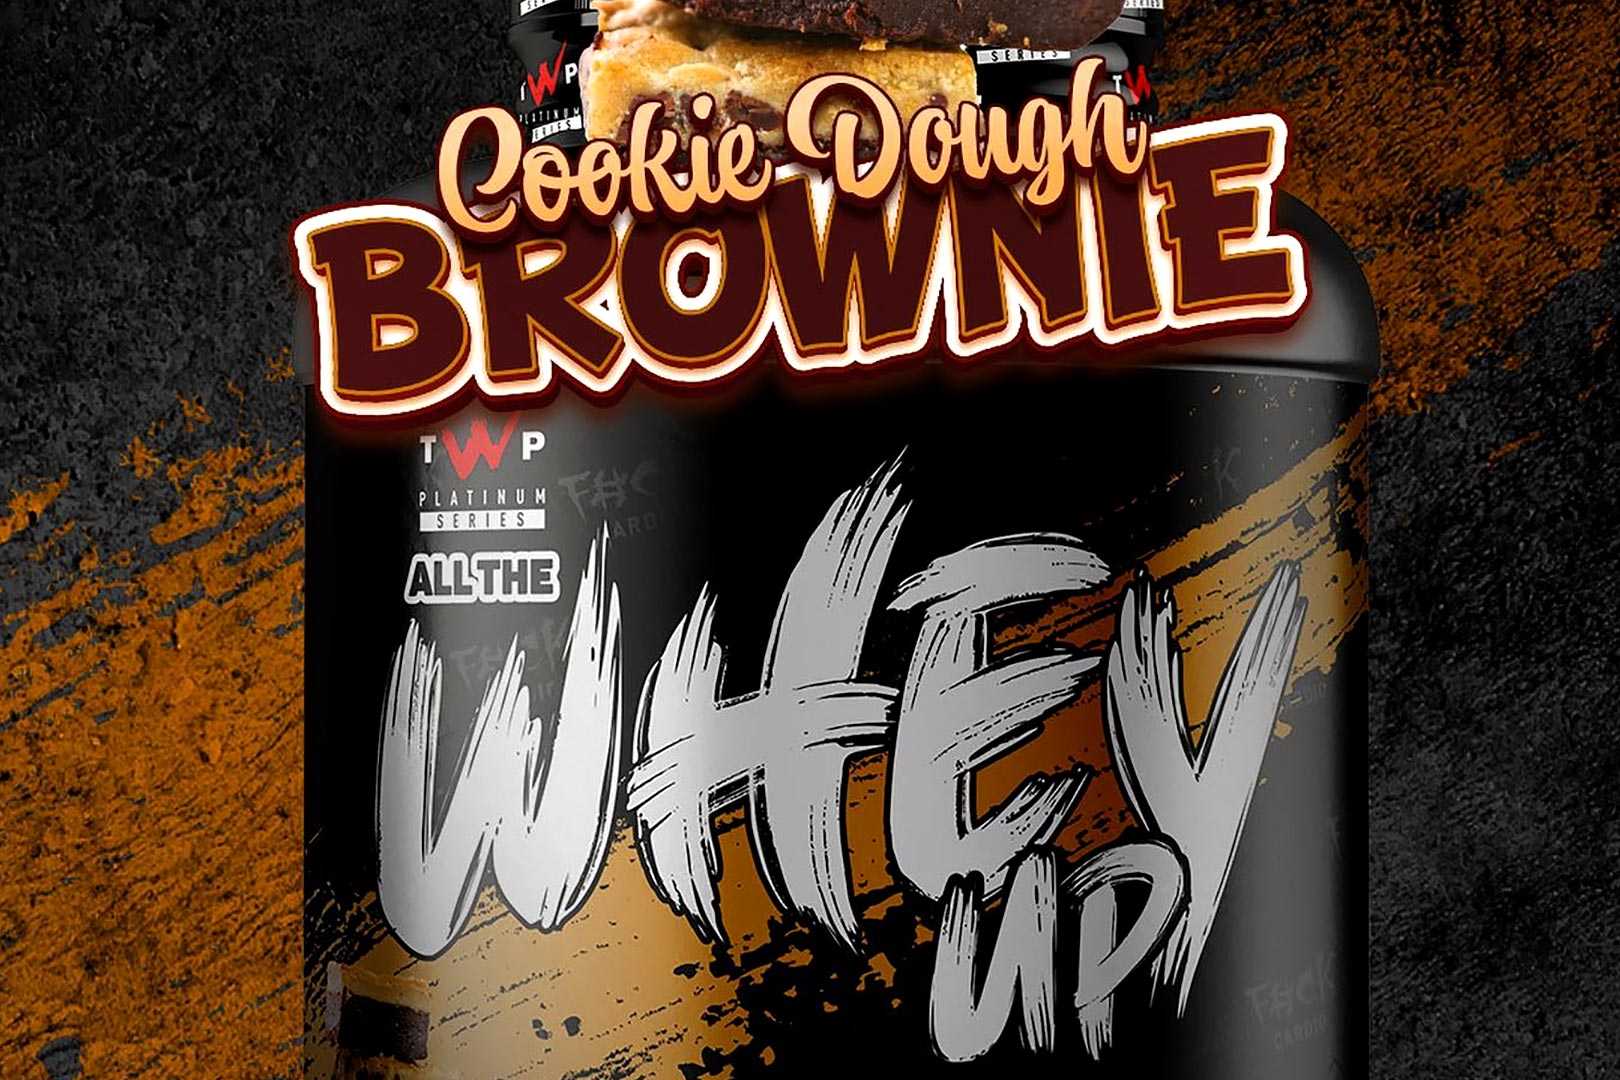 Twp Nutrition Cookies Dough Brownie All The Whey Up